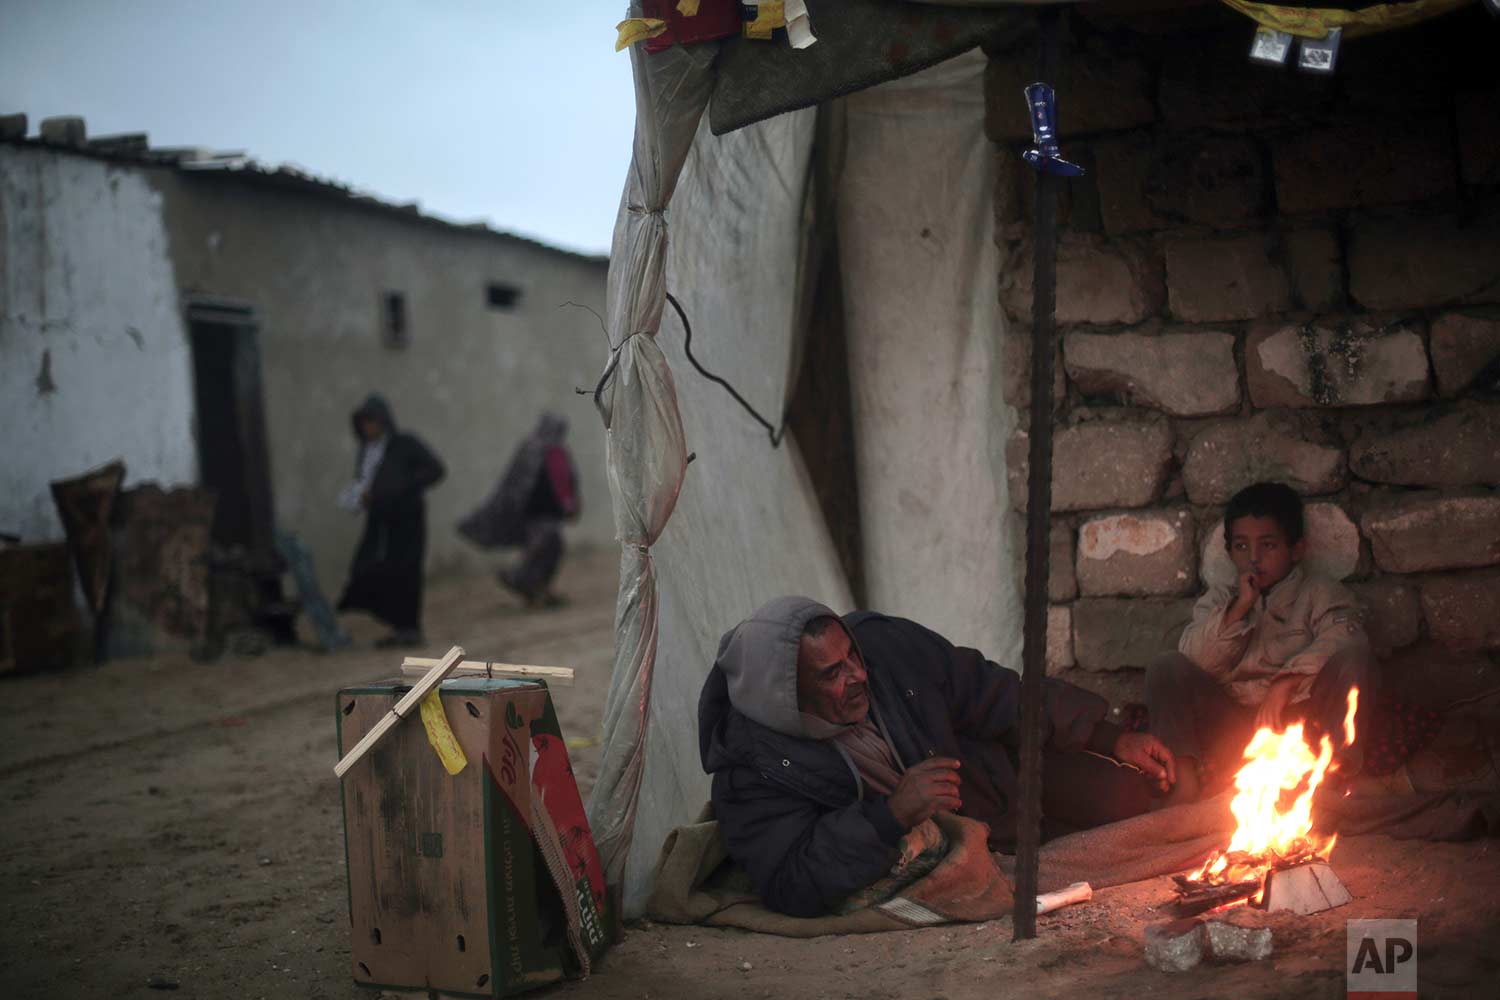  A Palestinian man and his son warm themselves by a fire during cold, rainy weather in a slum on the outskirts of the Khan Younis refugee camp, southern Gaza Strip, Friday, Jan. 5, 2018. (AP Photo/Khalil Hamra) 